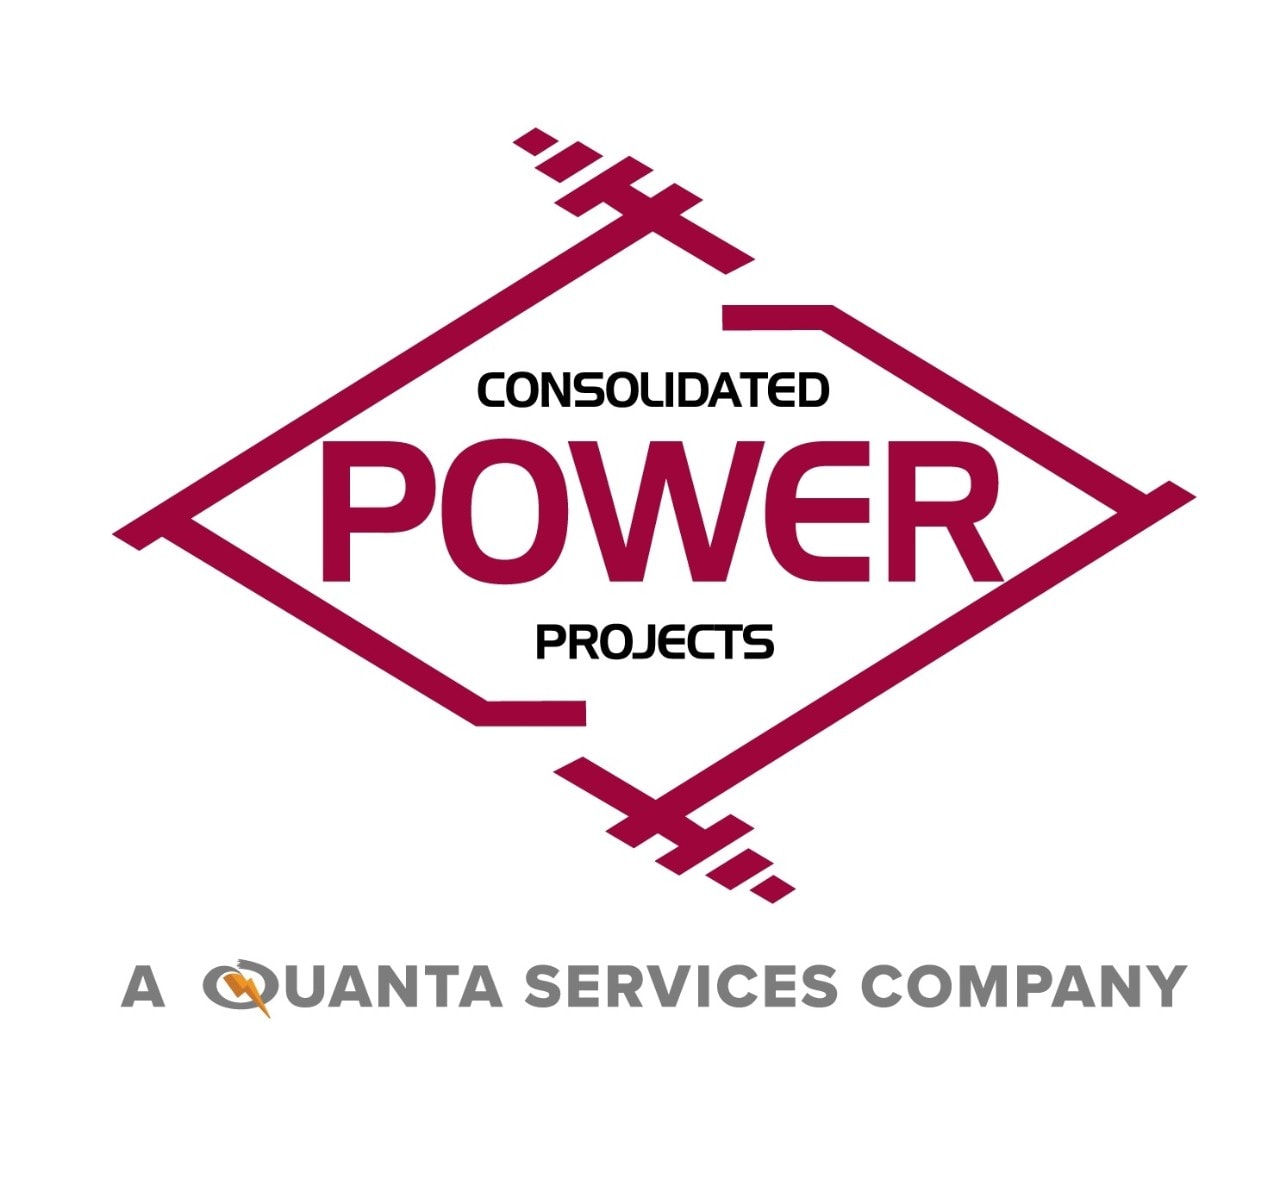 Consolidated Power Projects